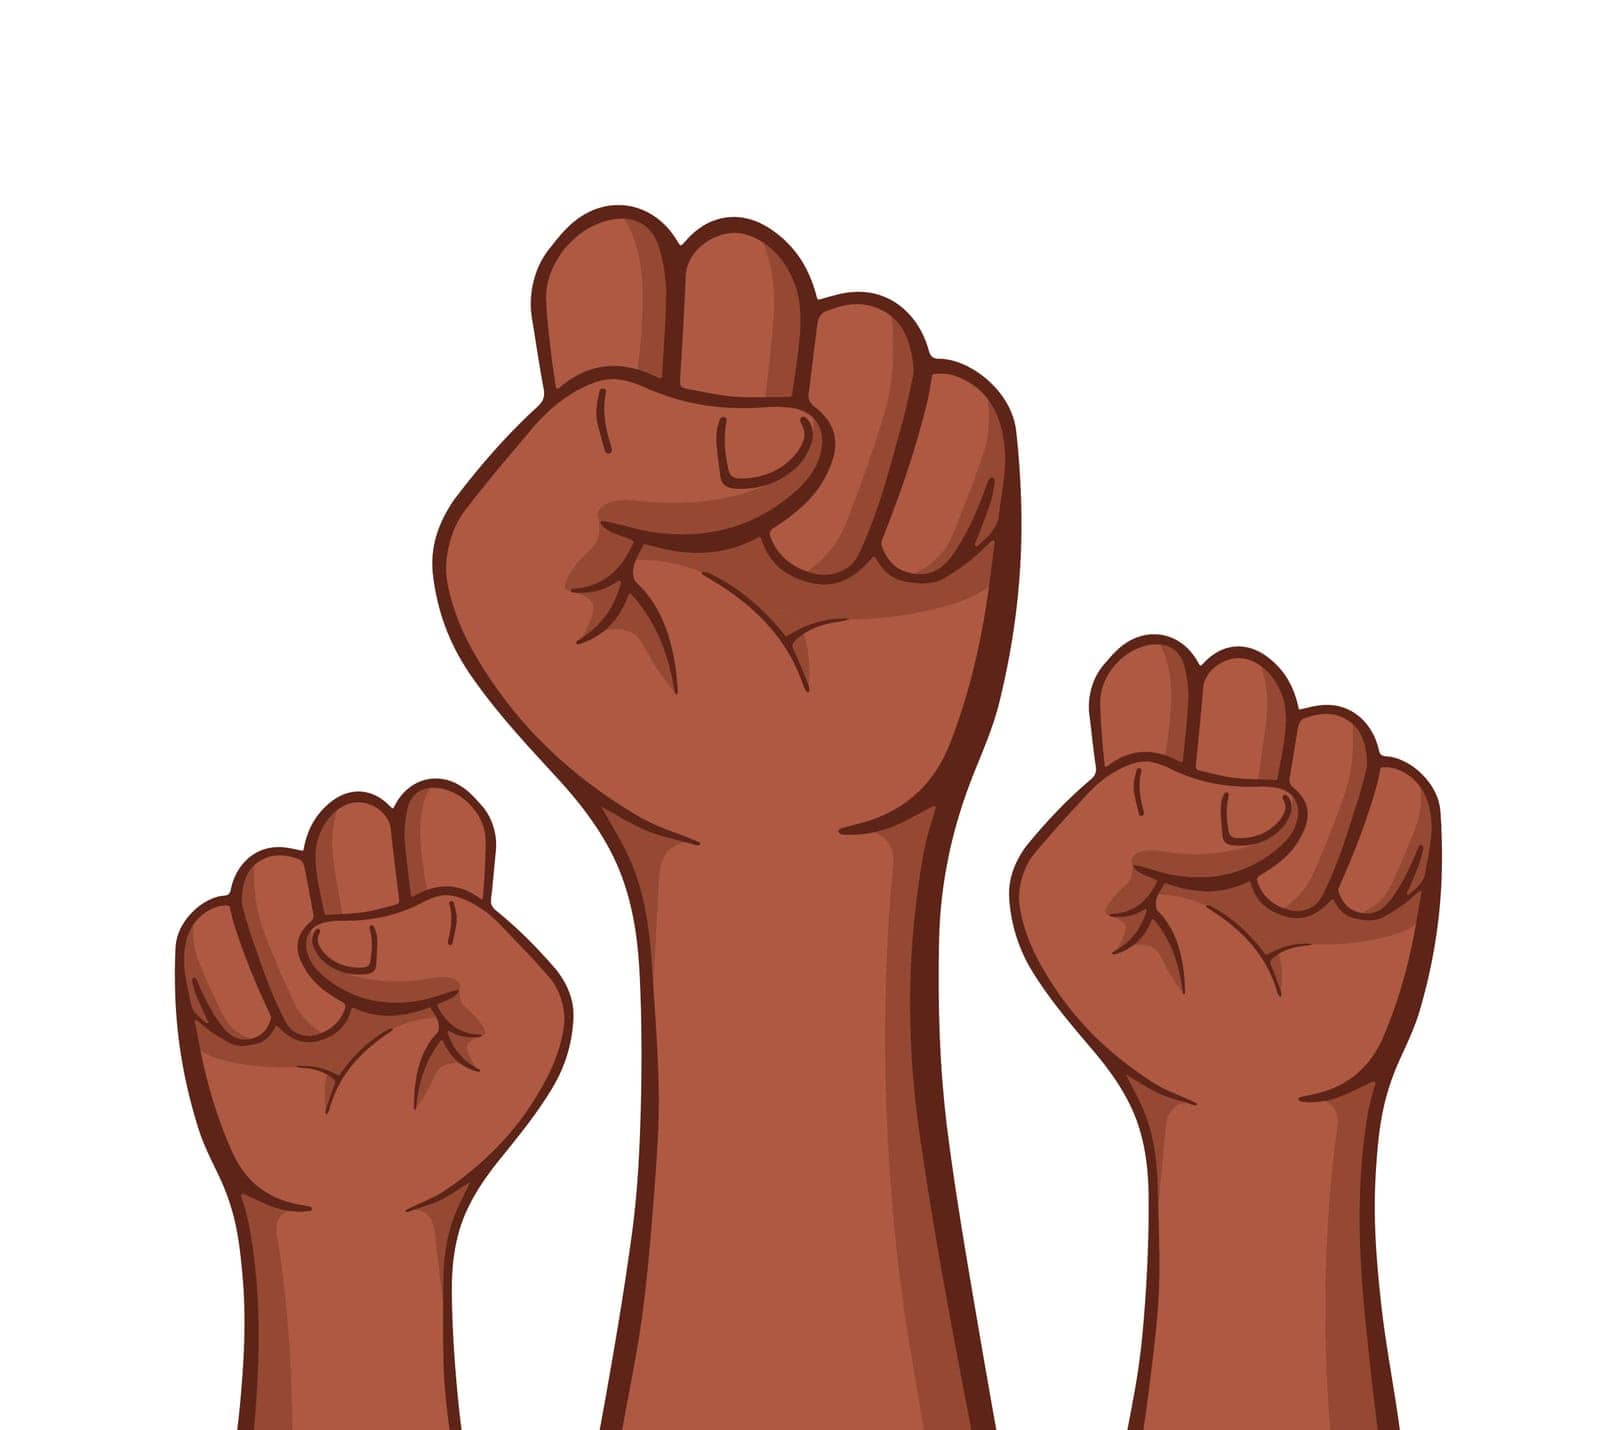 Black History Month. African American History arm fist vector illustration. February celebration poster, card, banner, background.